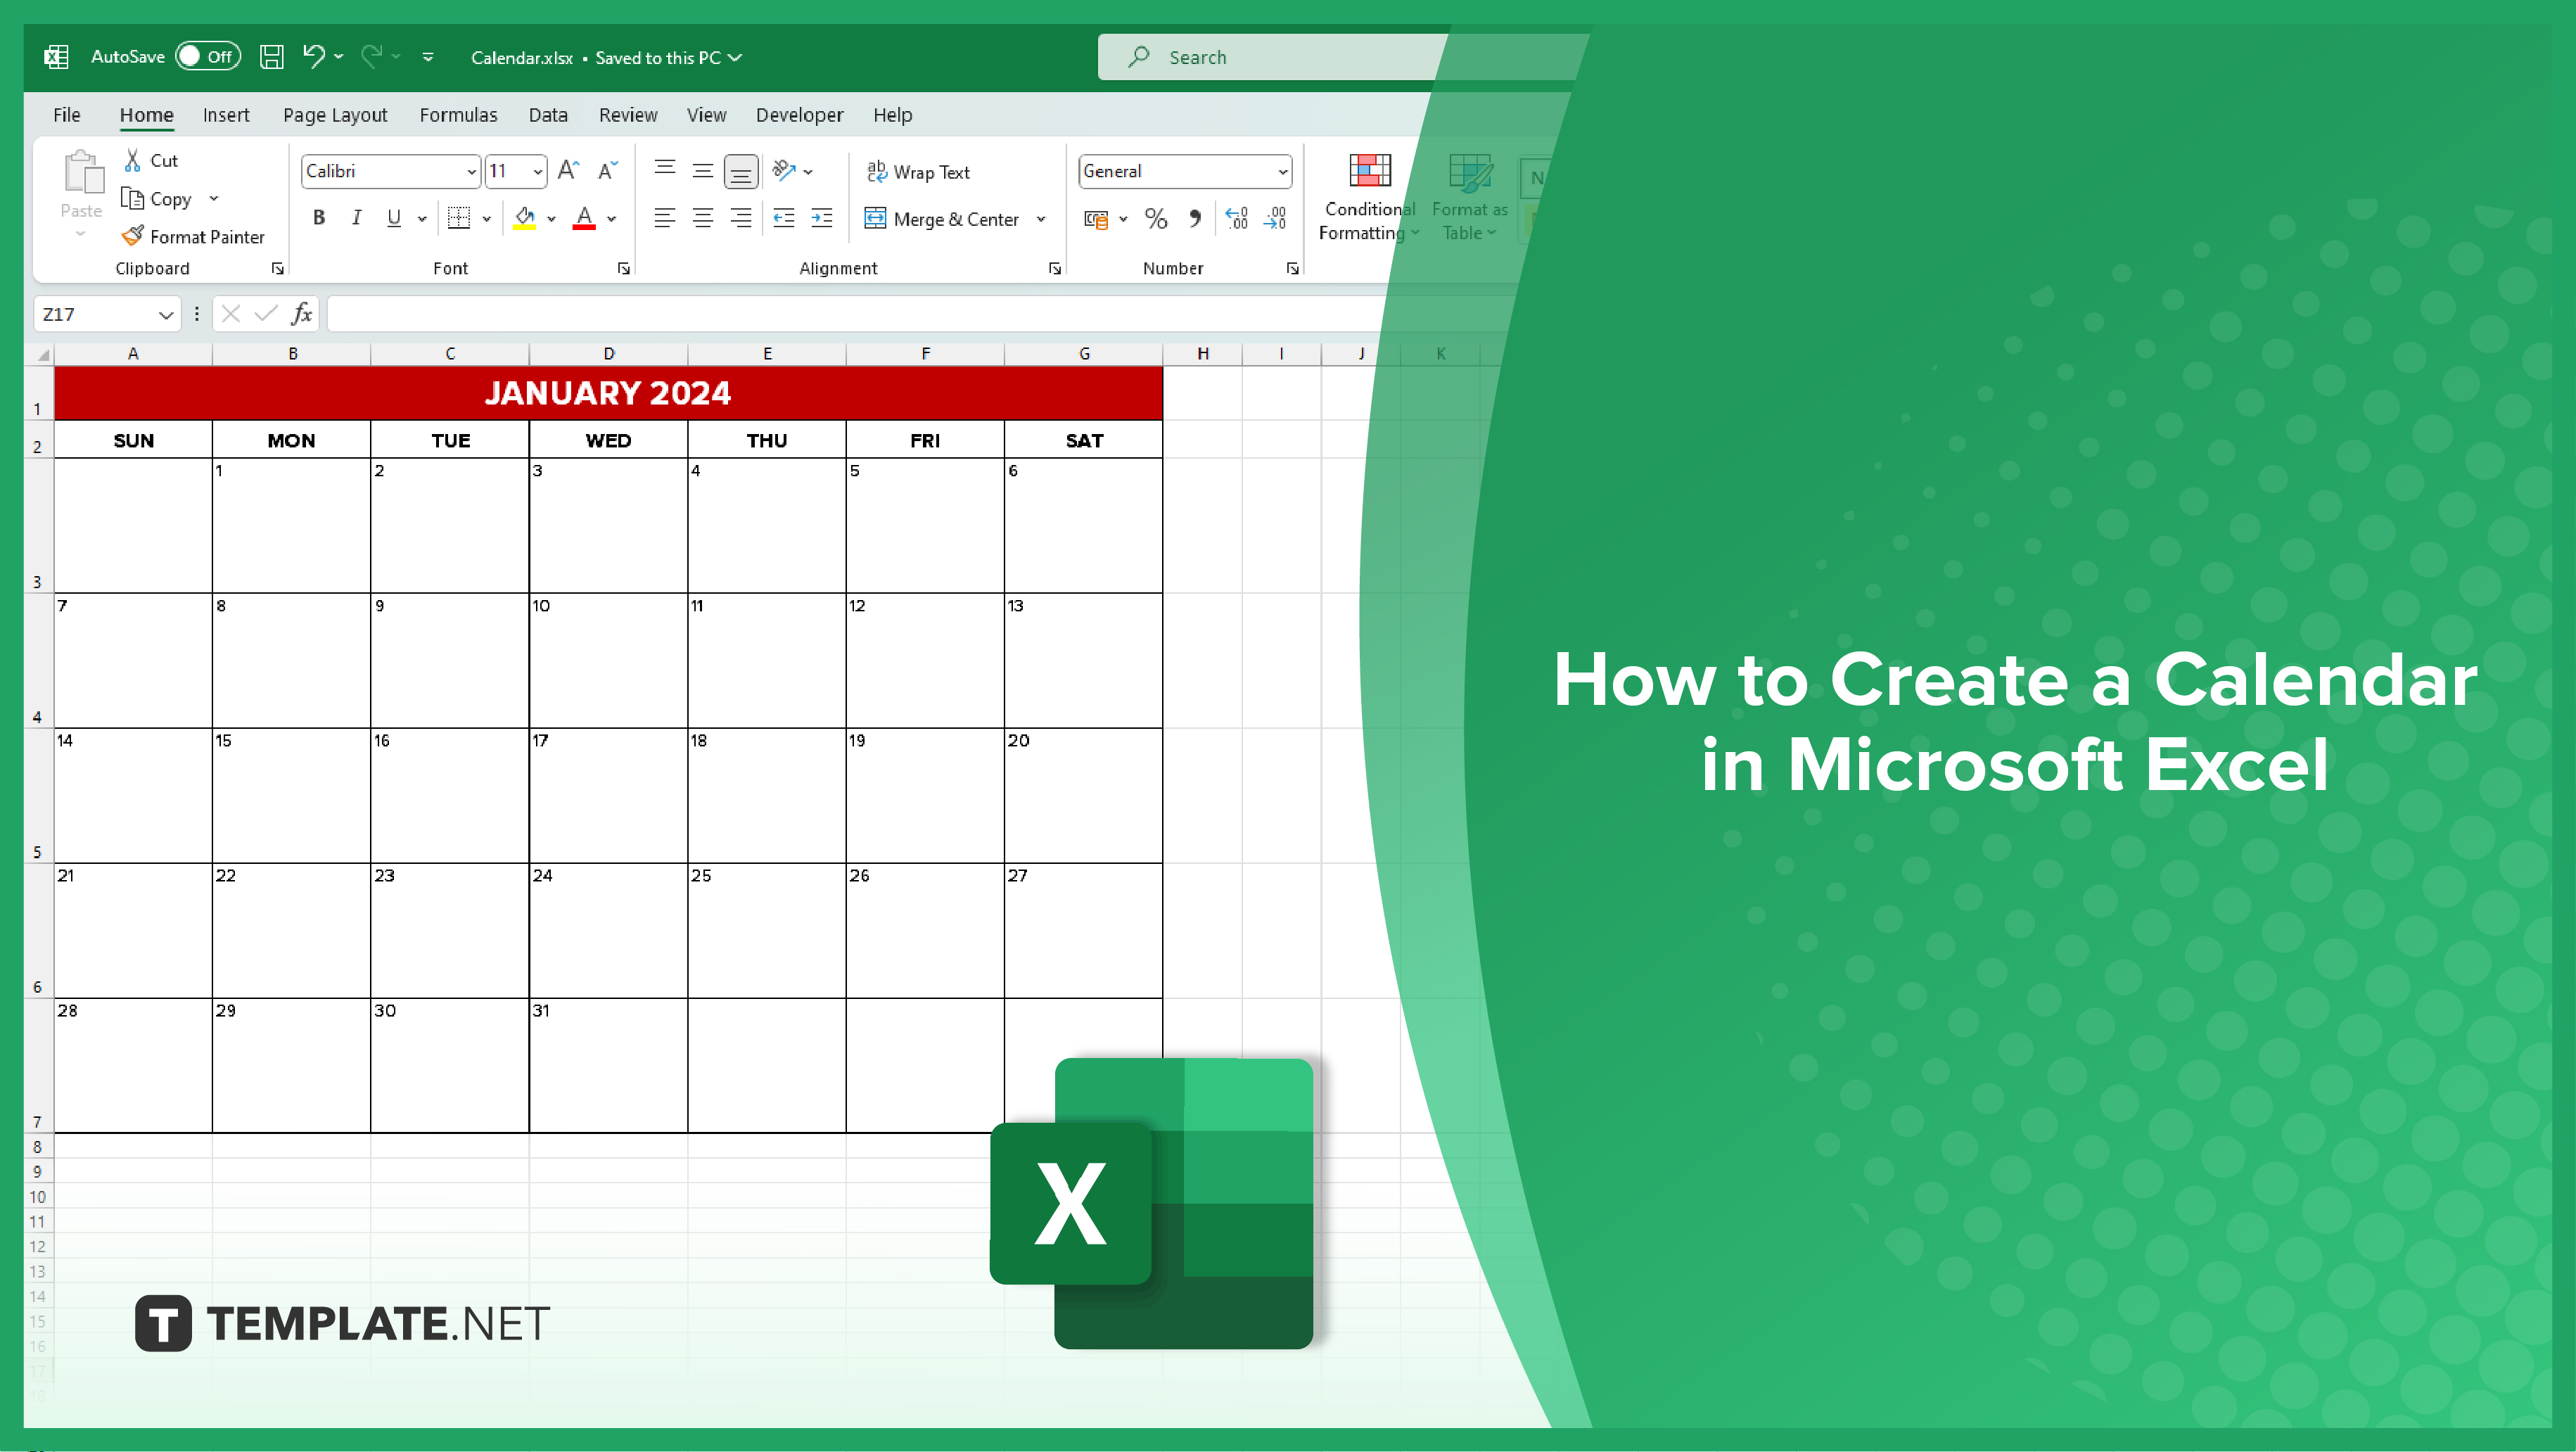 How to Create a Calendar in Microsoft Excel